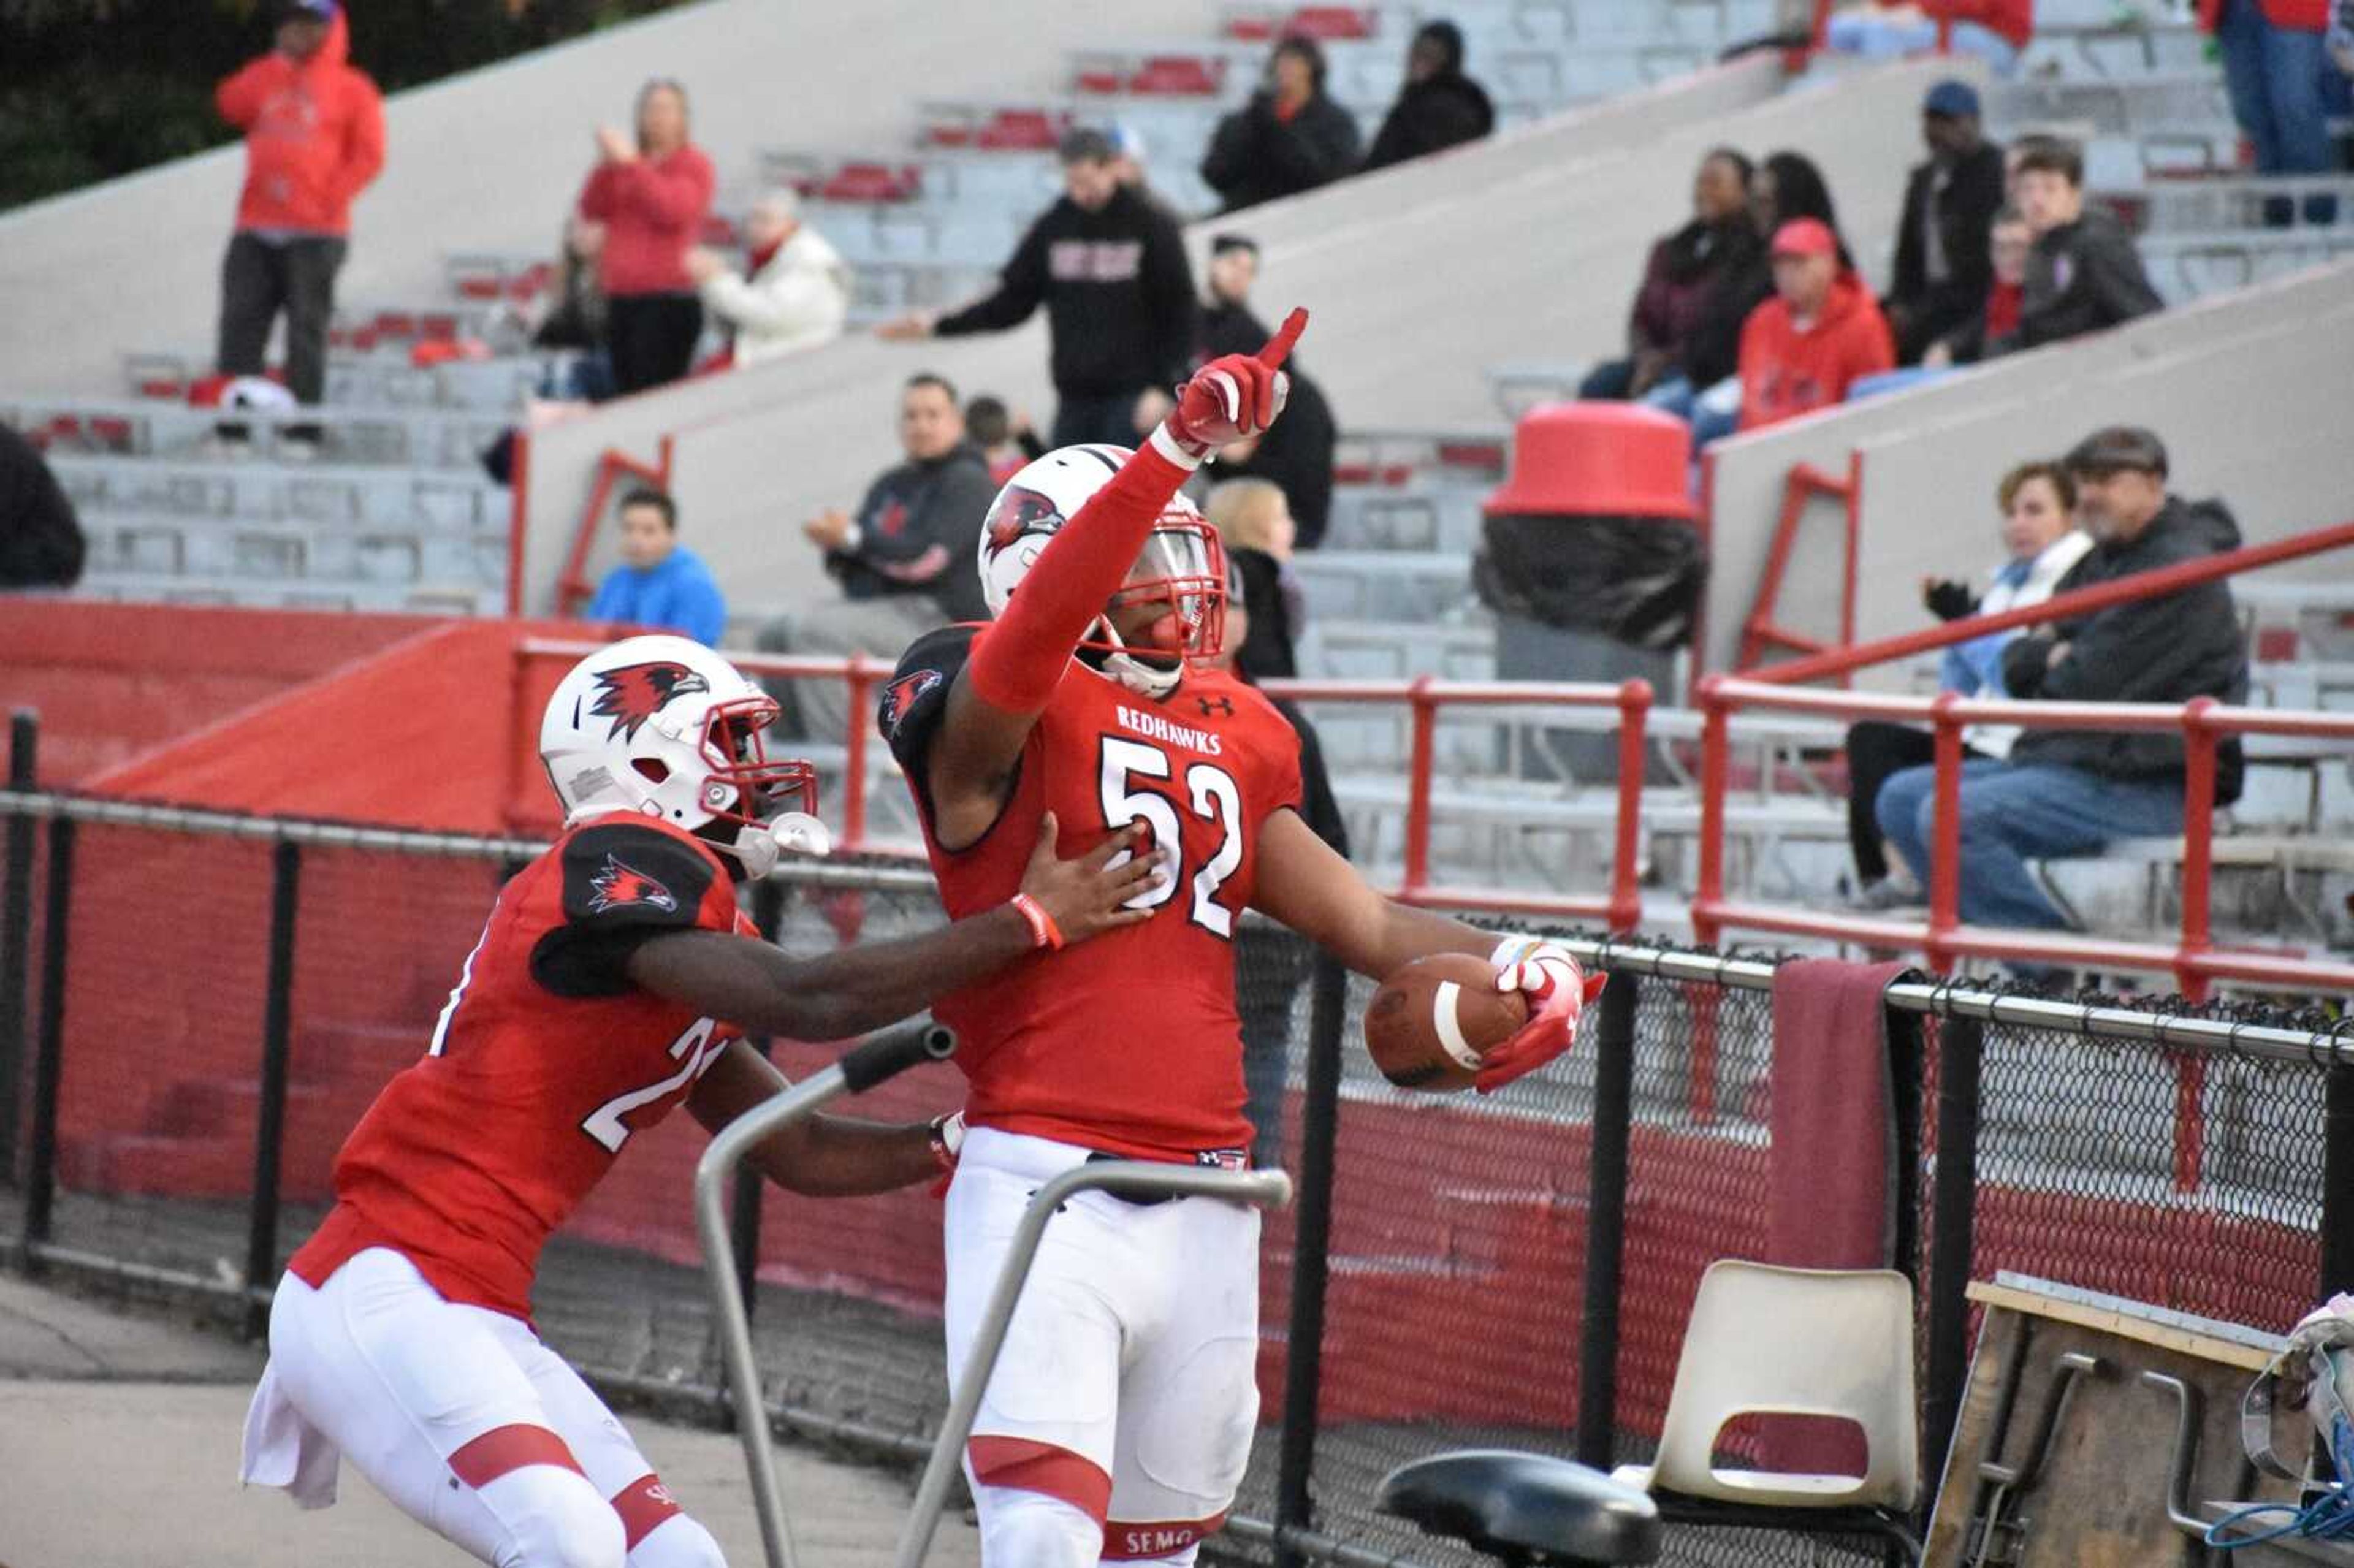 Sophomore outside linebacker Omardrick Douglas points to the fans after getting the game-sealing interception in the 38-32 win over Eastern Illinois.